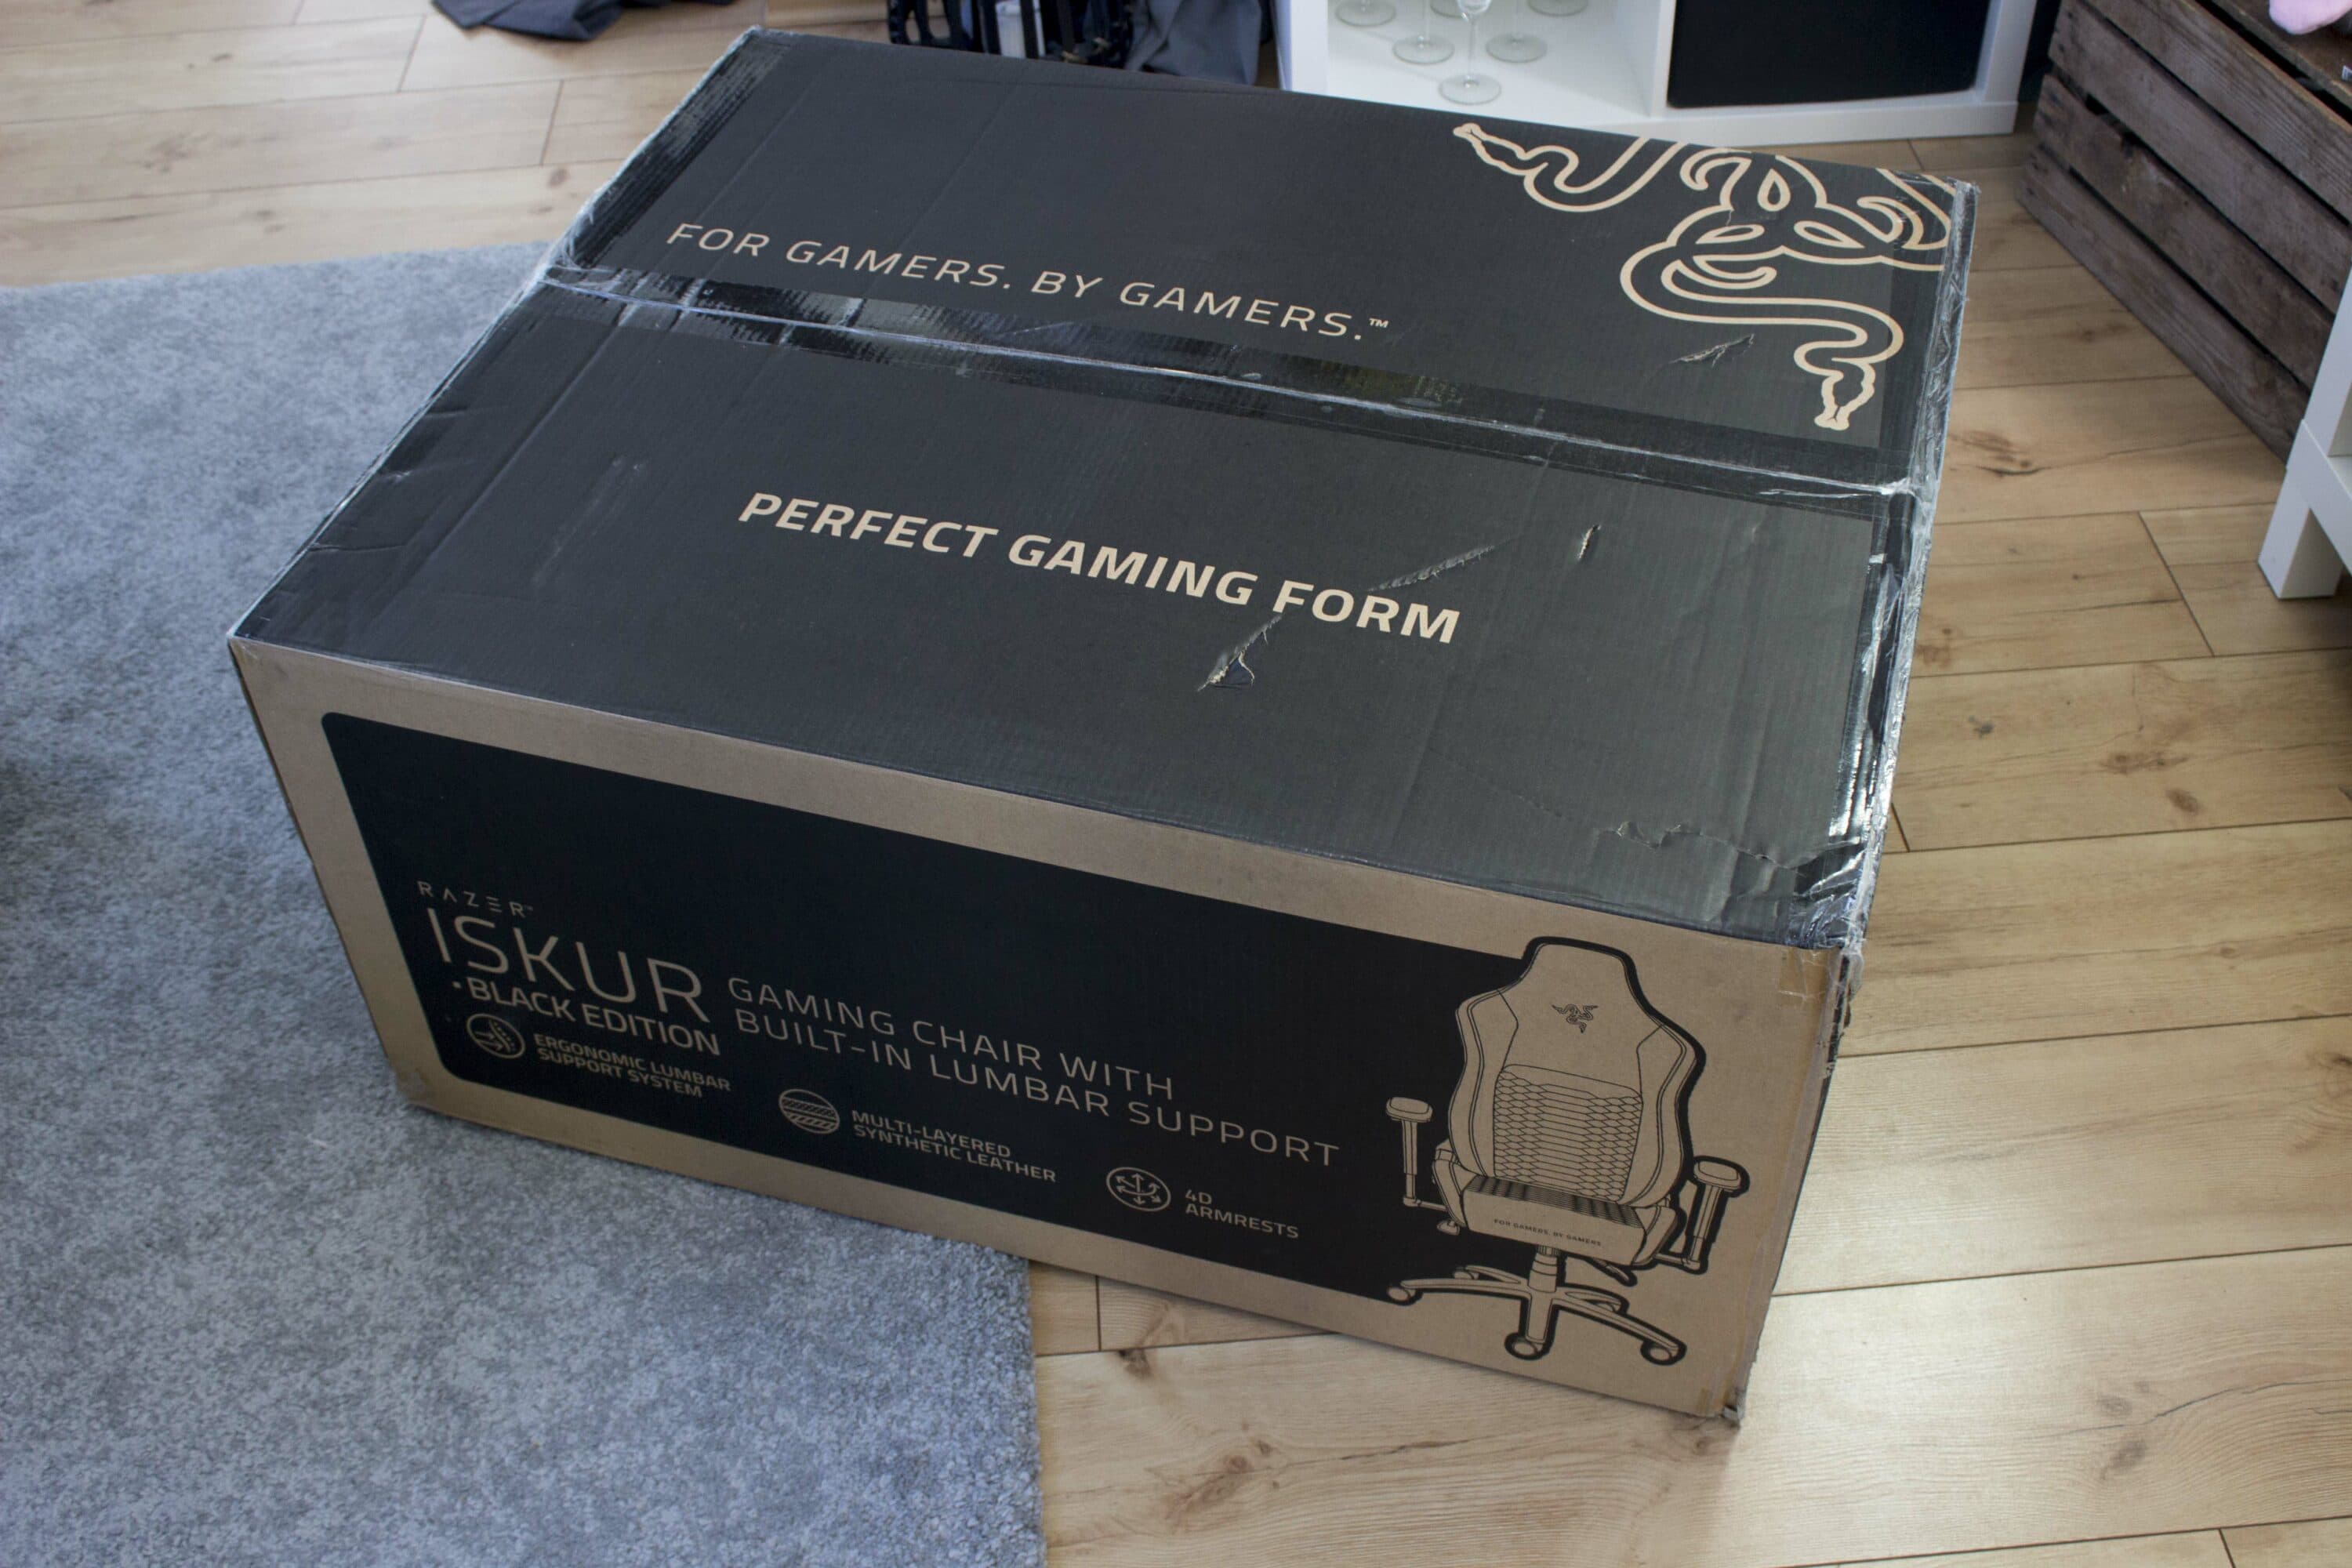 Razer Iskur in test: gaming features special with chair